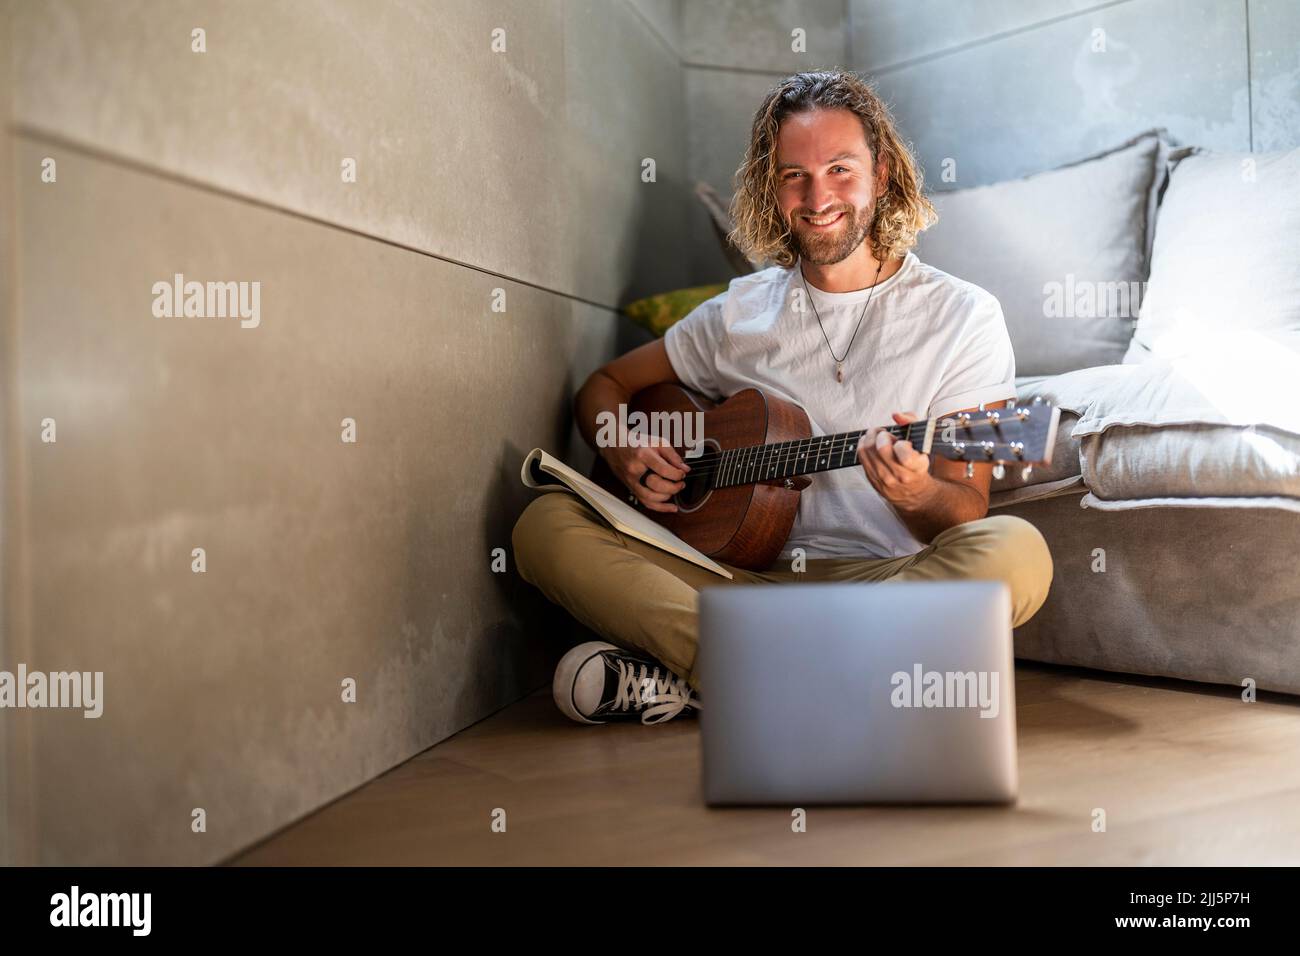 Smiling composer playing guitar at home Stock Photo